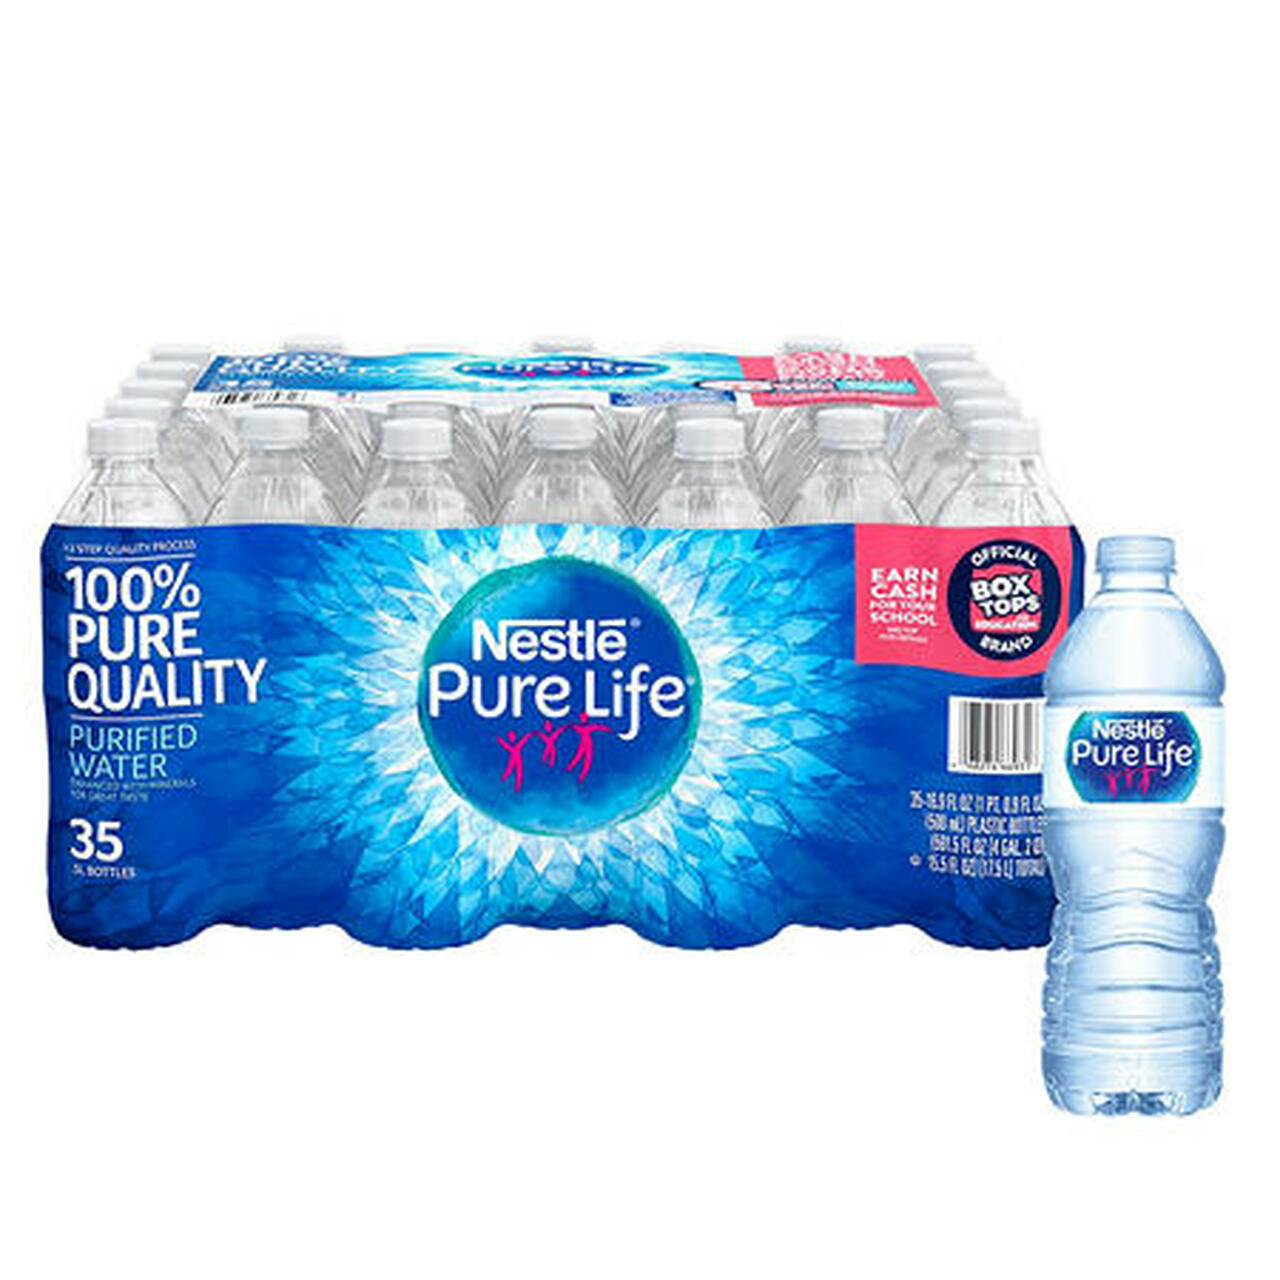 NESTLE PURE LIFE PURIFIED DRINKING WATER 16.9 OZ 35 PACK